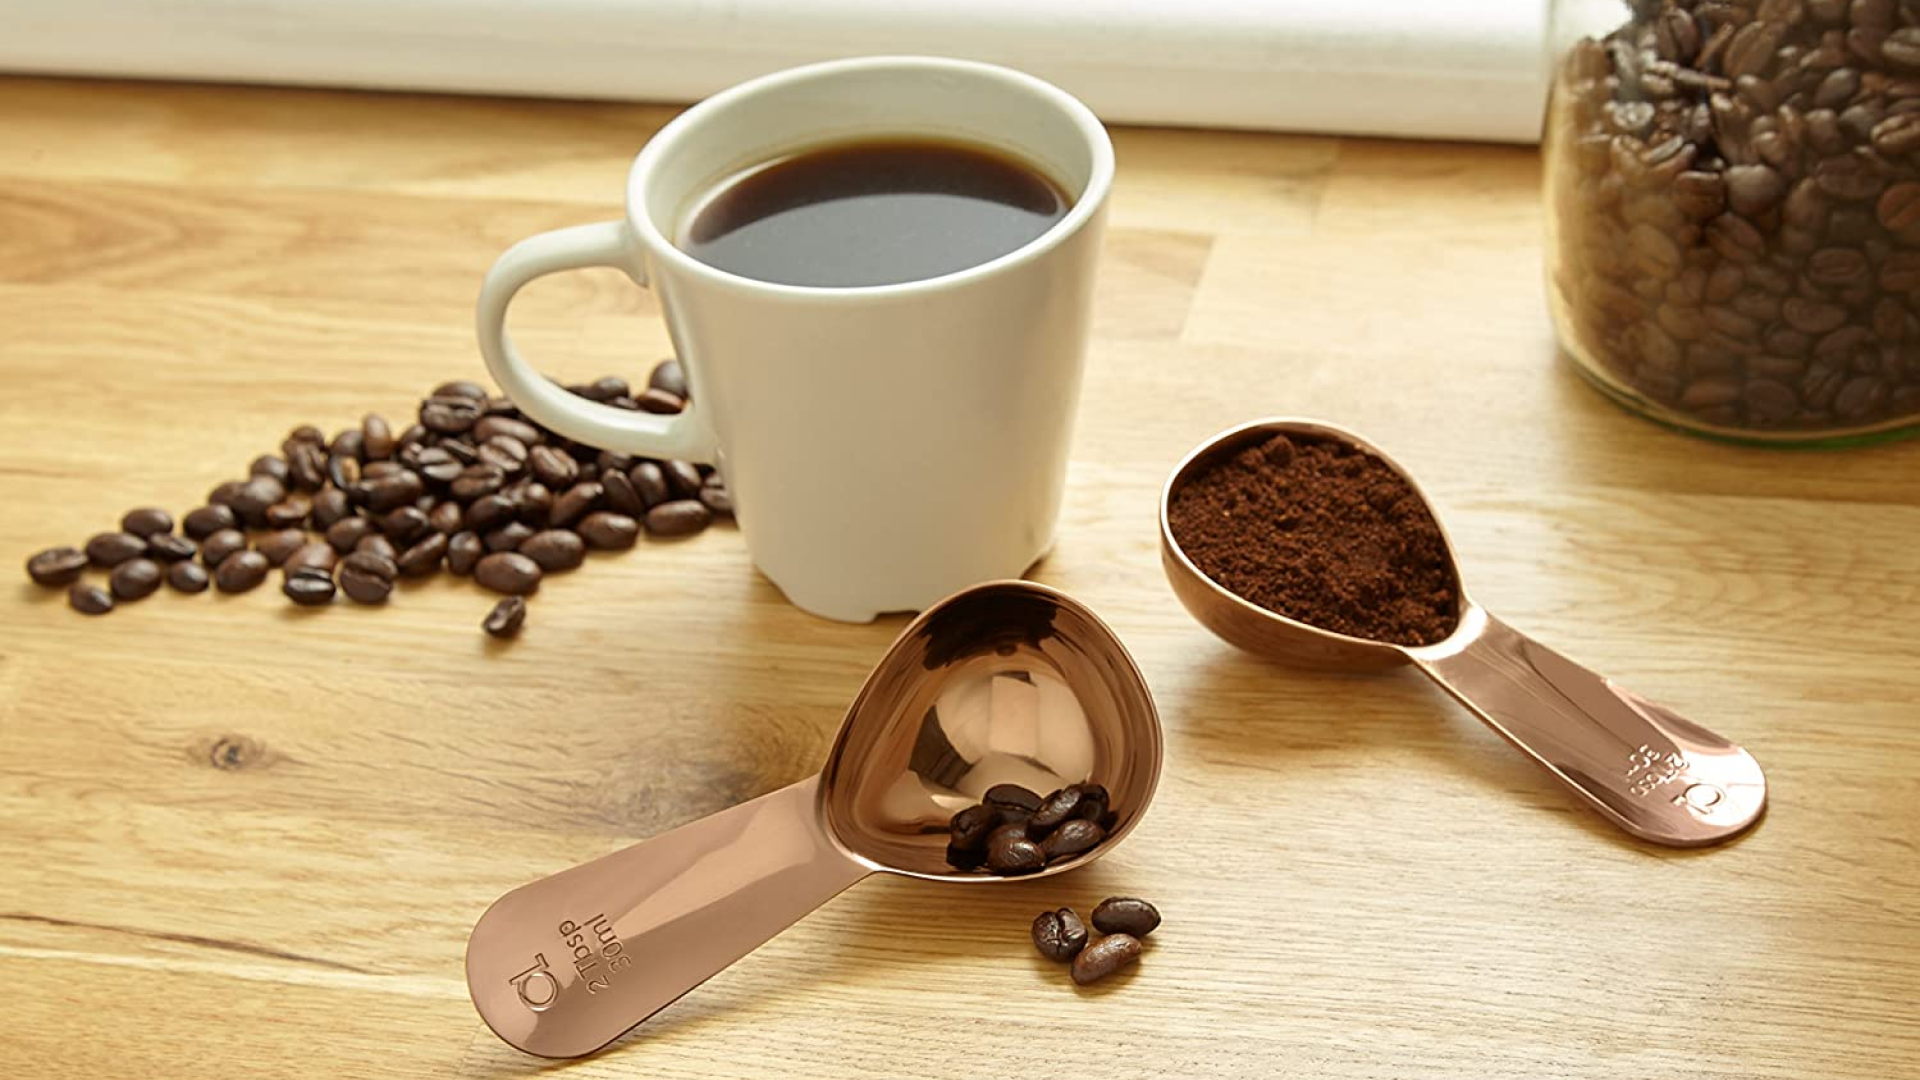 Coffee scoops